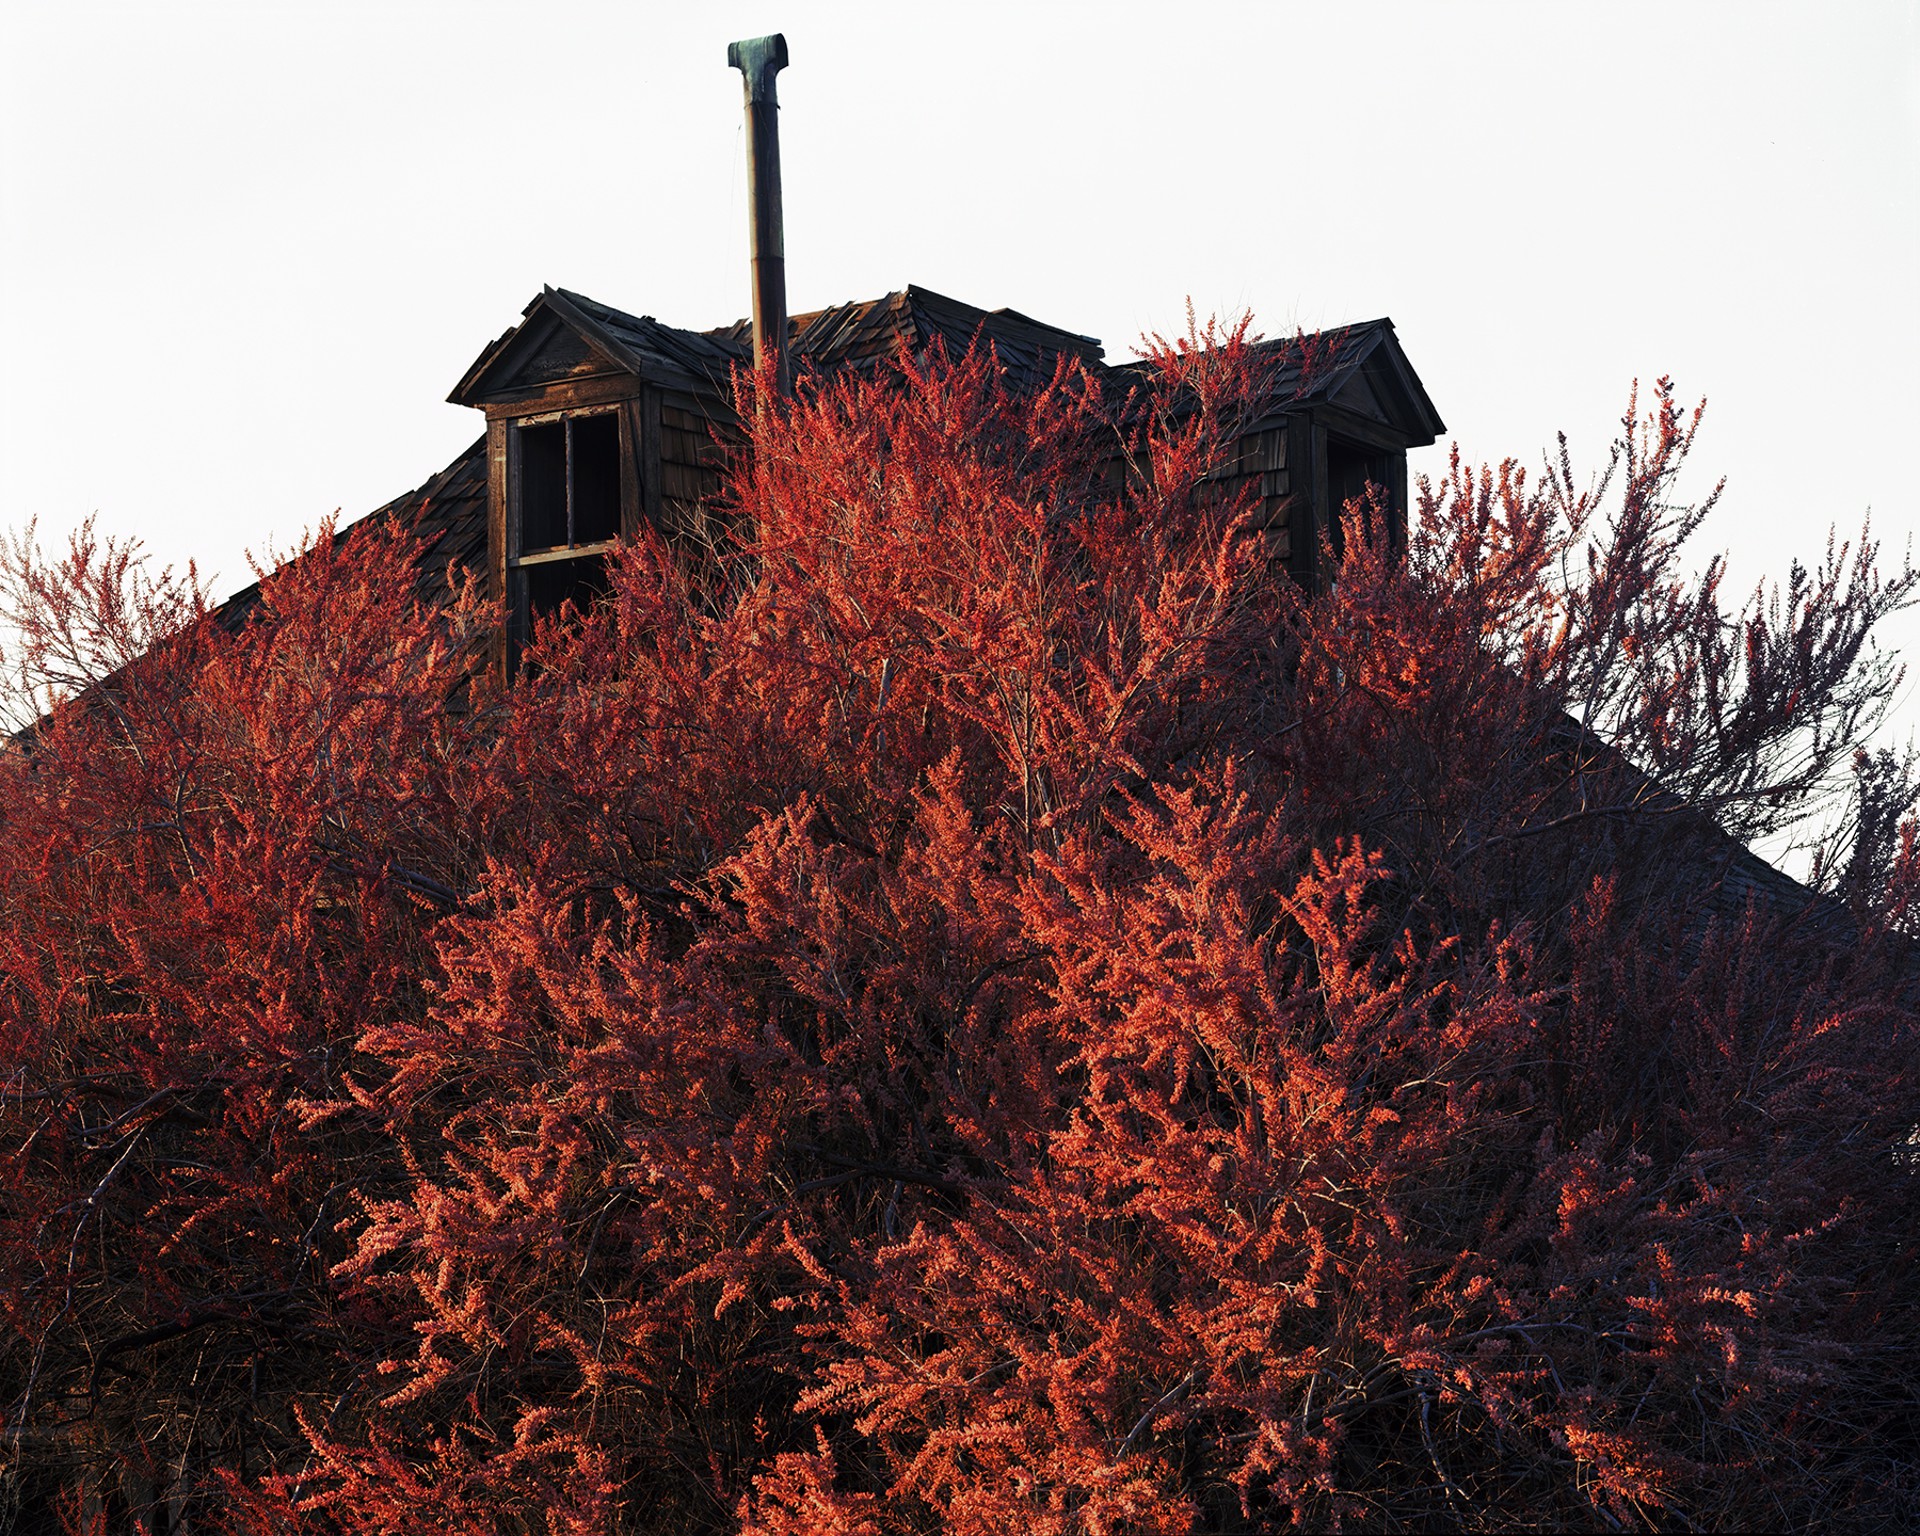 Blooming Tamarisk (in the town where my great-grandmother died), Goldfield, Nevada, 2015 by Laura McPhee